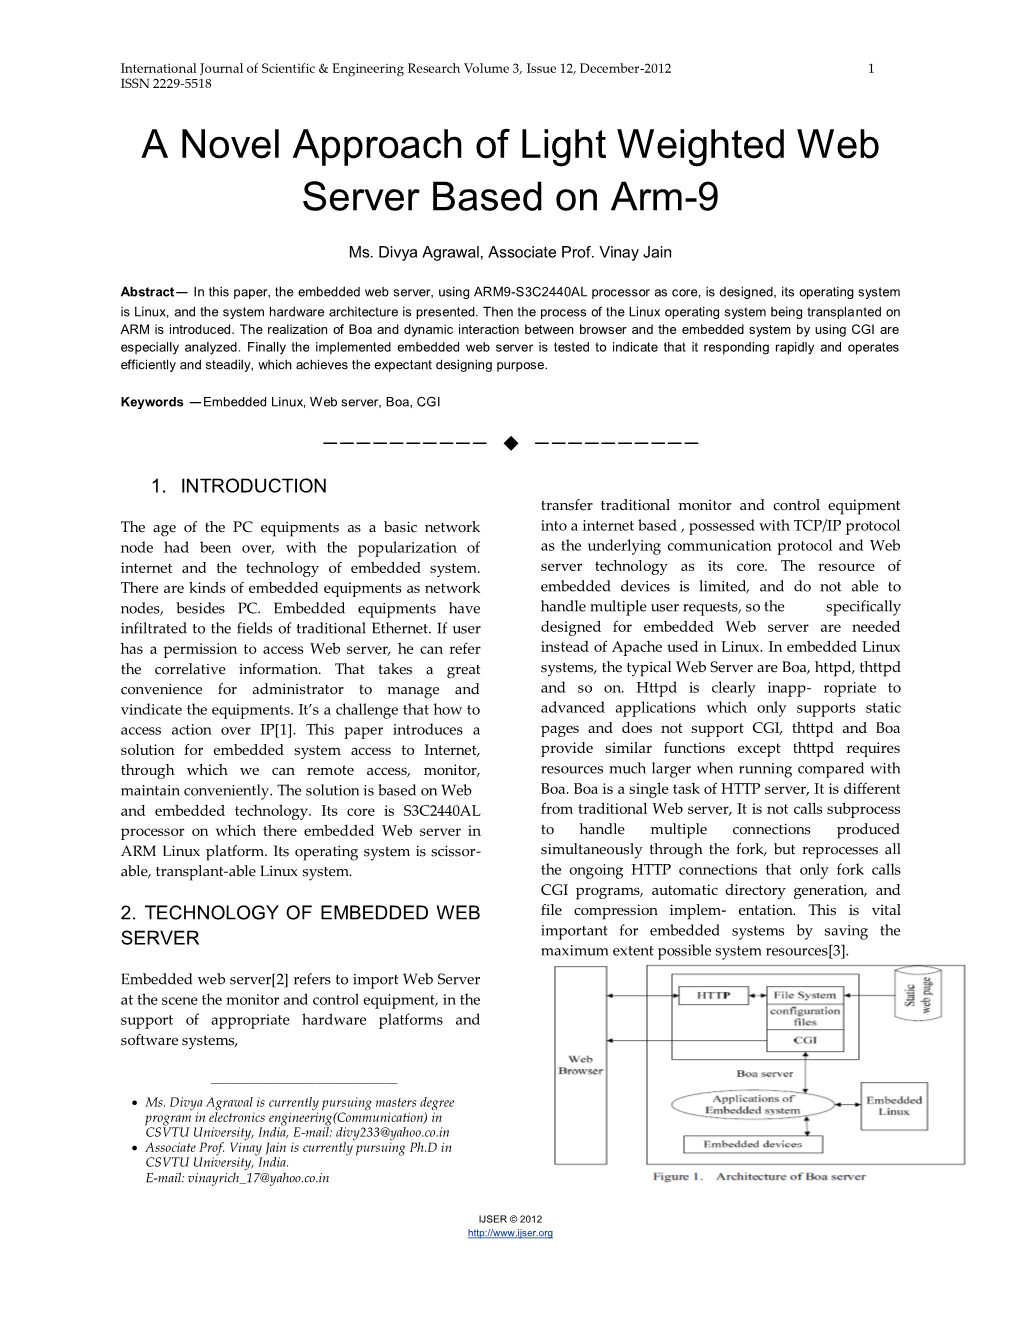 A Novel Approach of Light Weighted Web Server Based on Arm-9